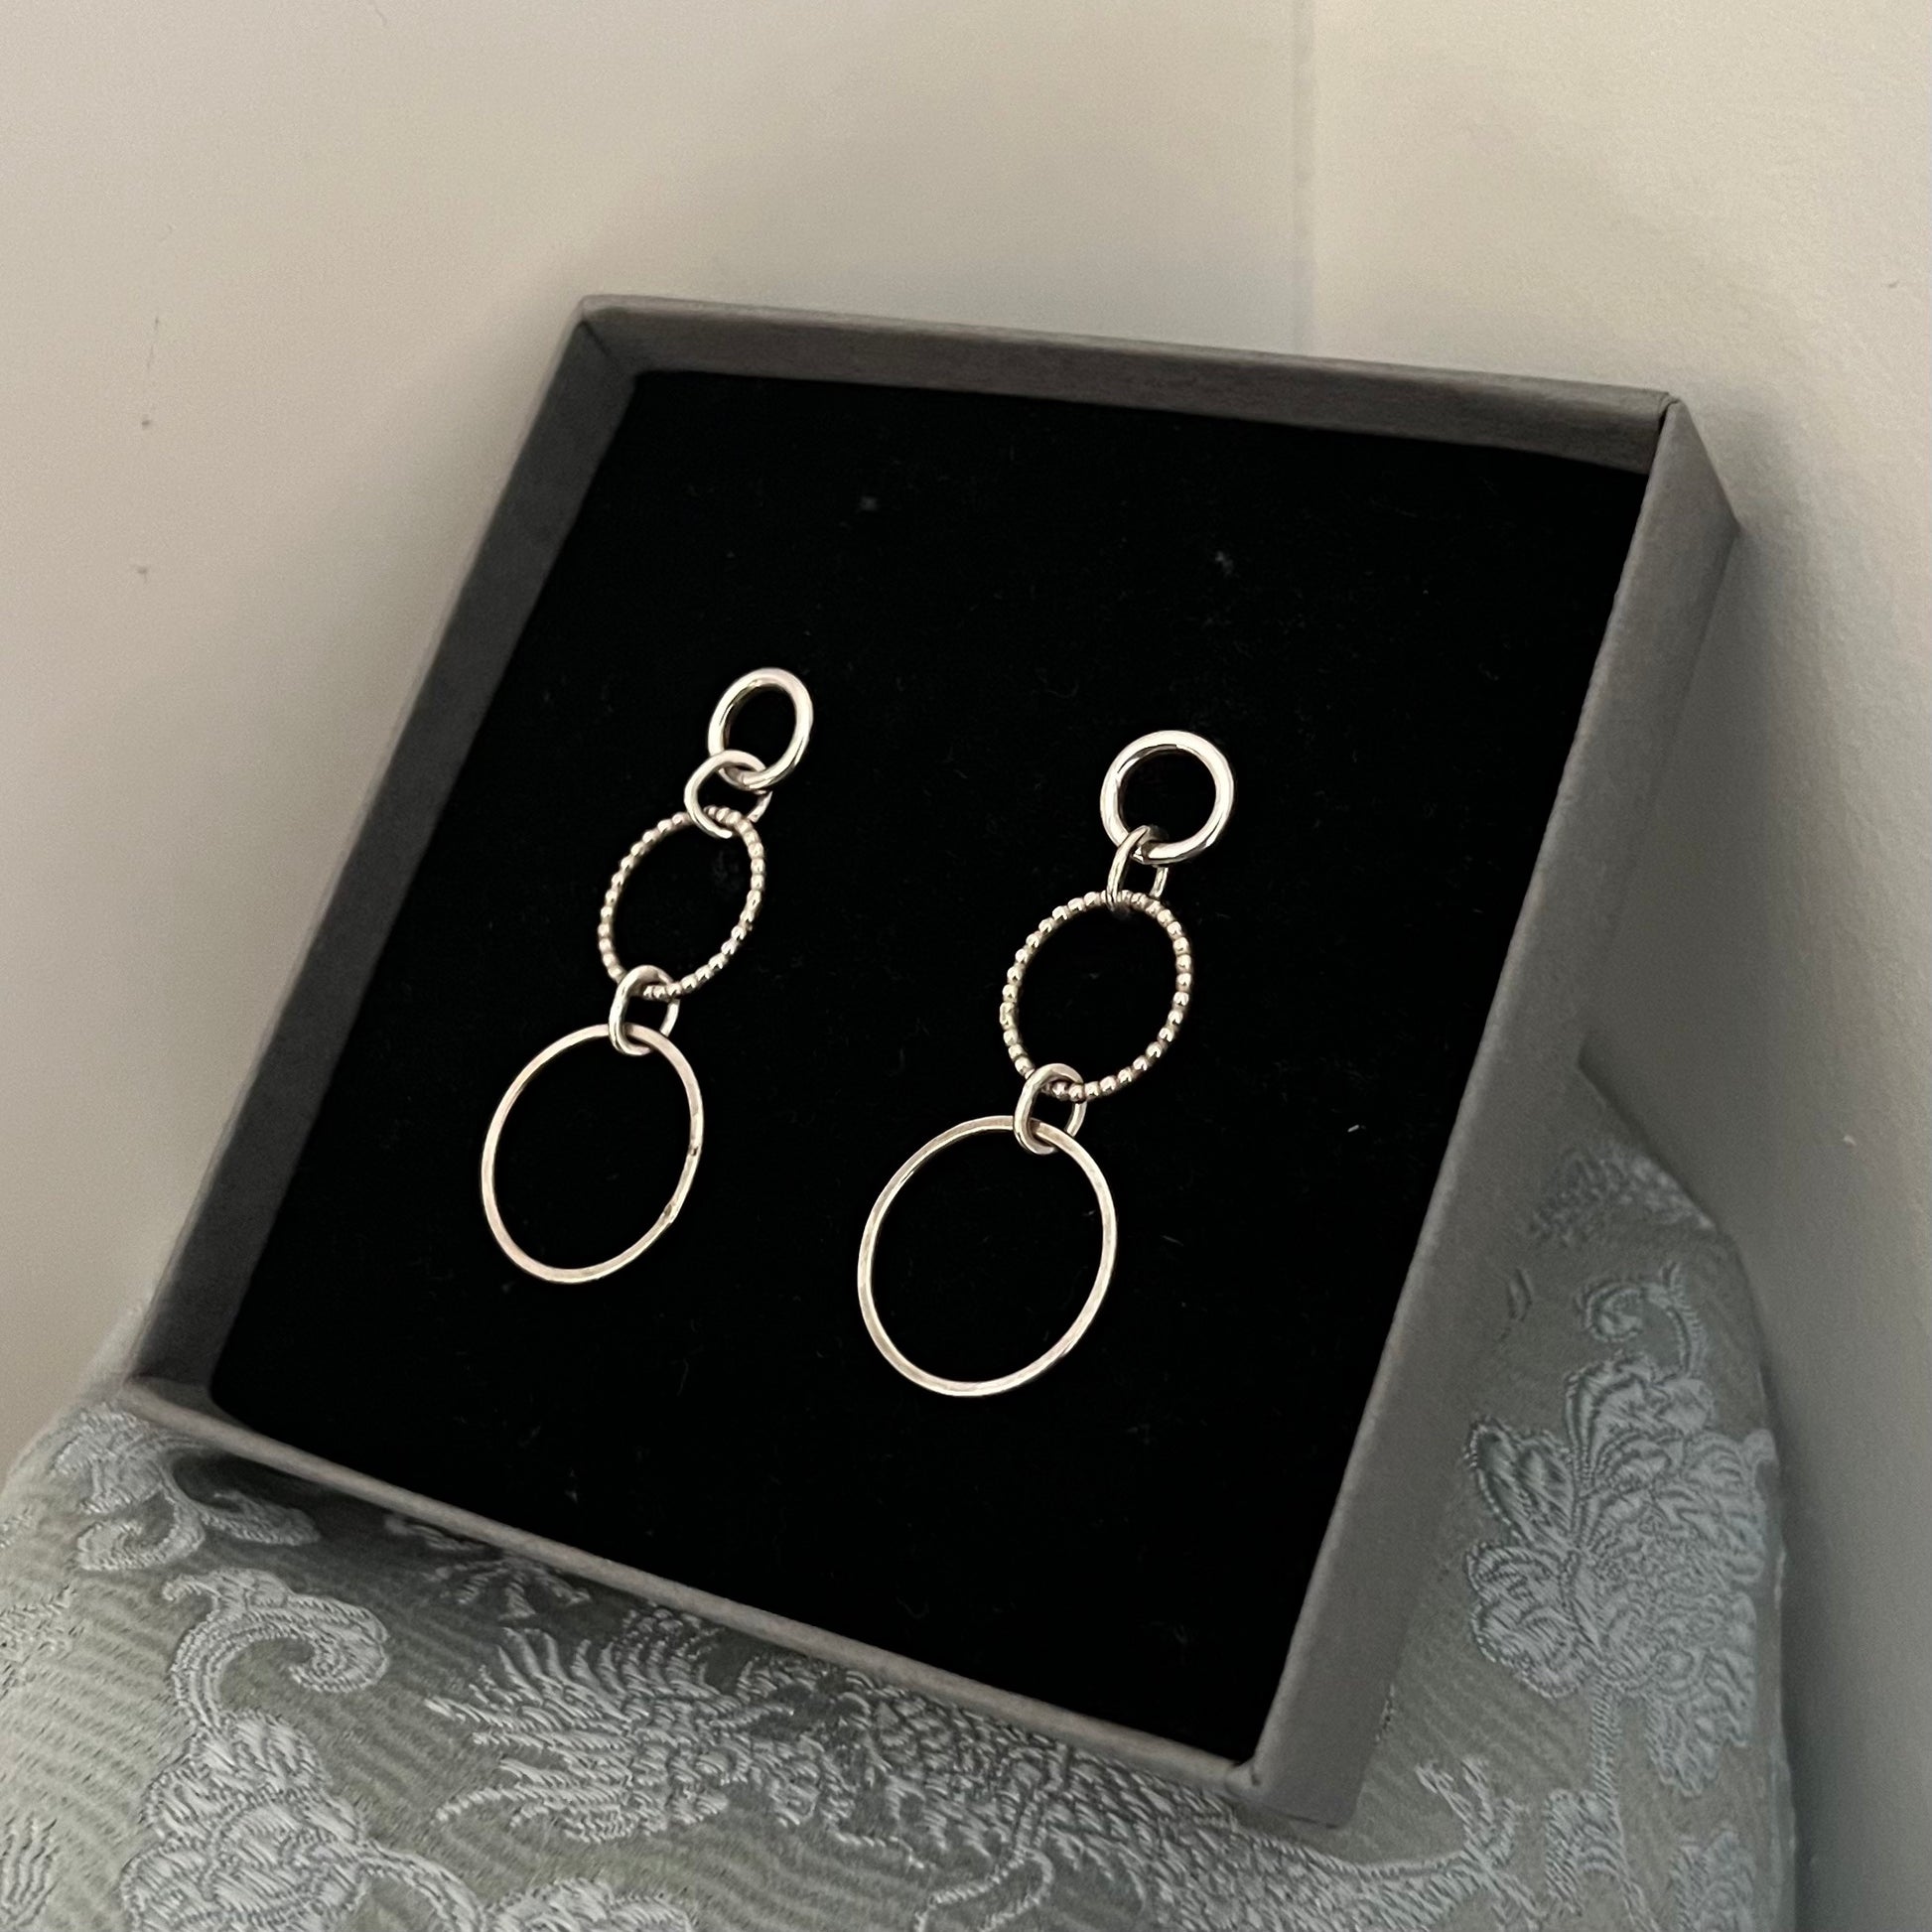 A pair of sterling silver earrings with five silver circles forming a snowman like shape.